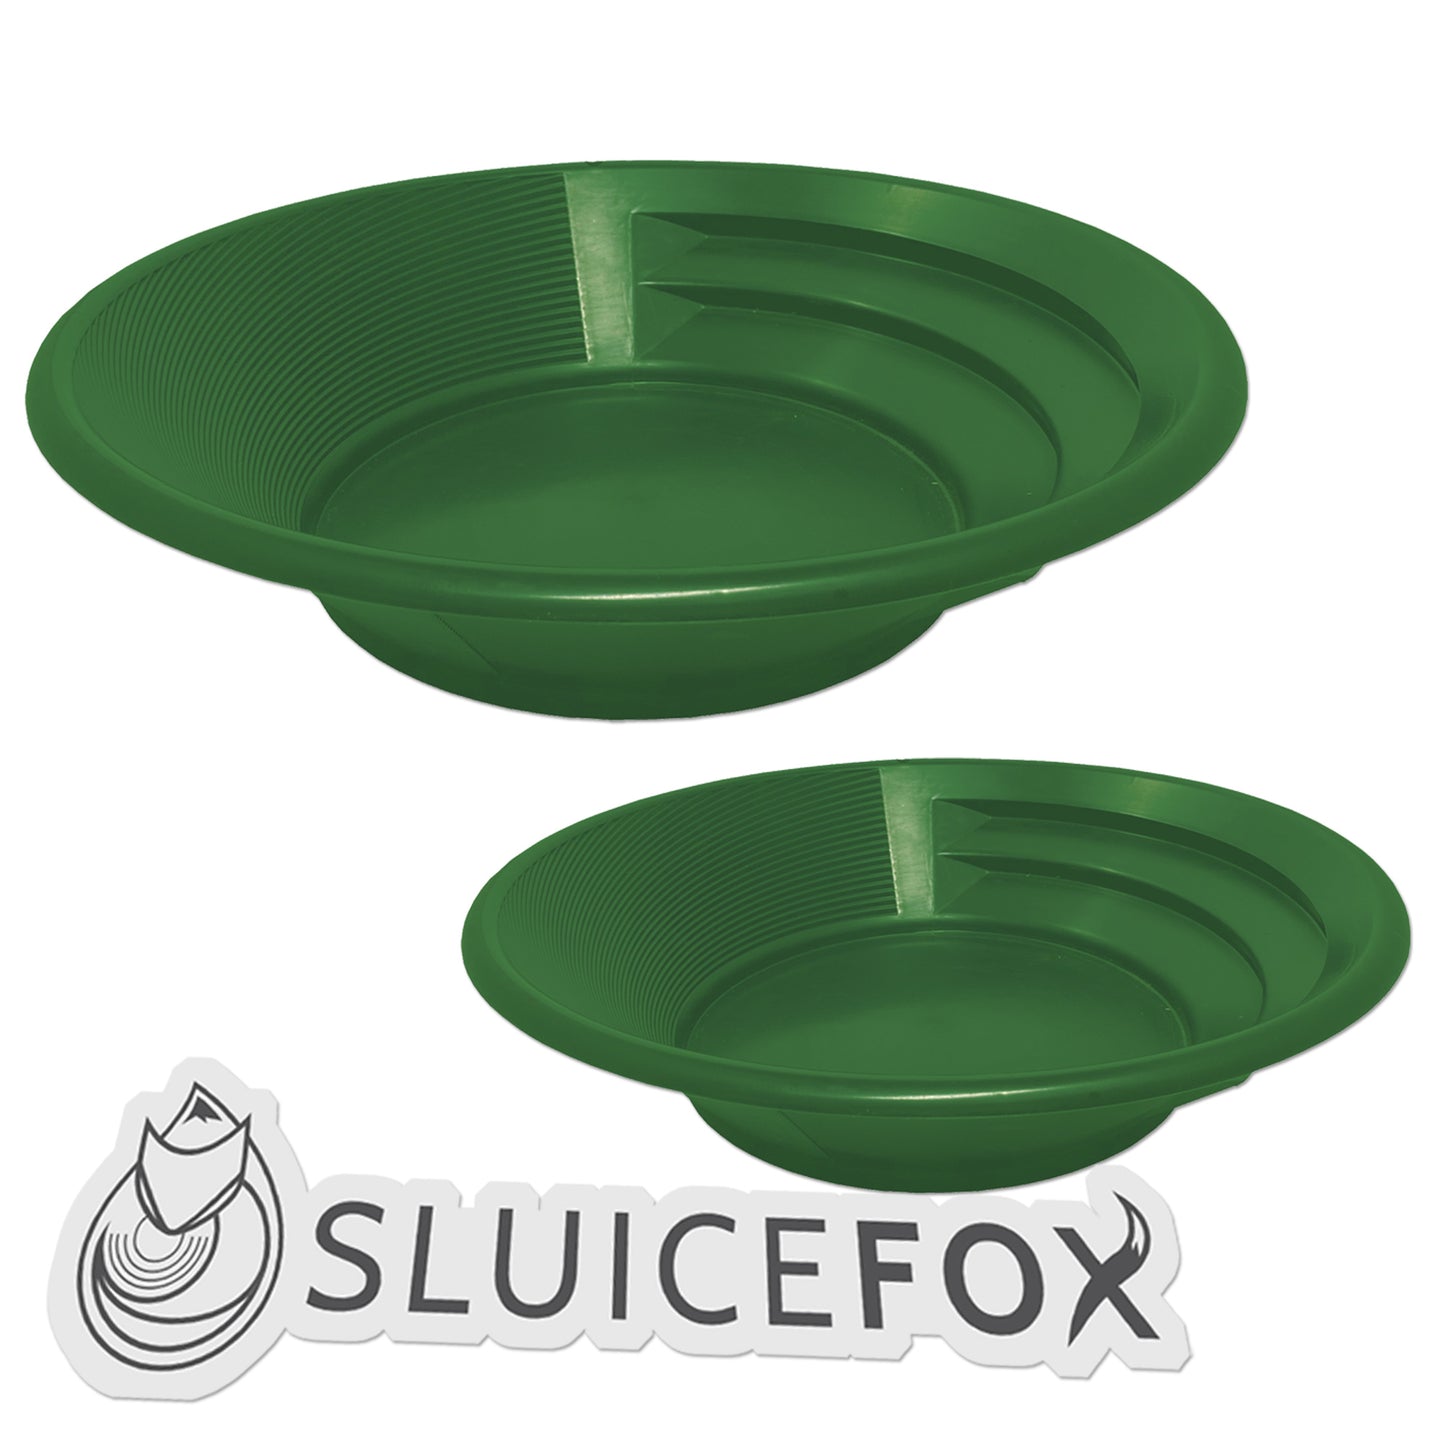 Set of 2 Large Nesting Gold Pans in 11 inch and 15 inch diameter; Sluice Fox patented spiral riffle gold pan; dual riffle spiral gold pans; plato para buscar oro